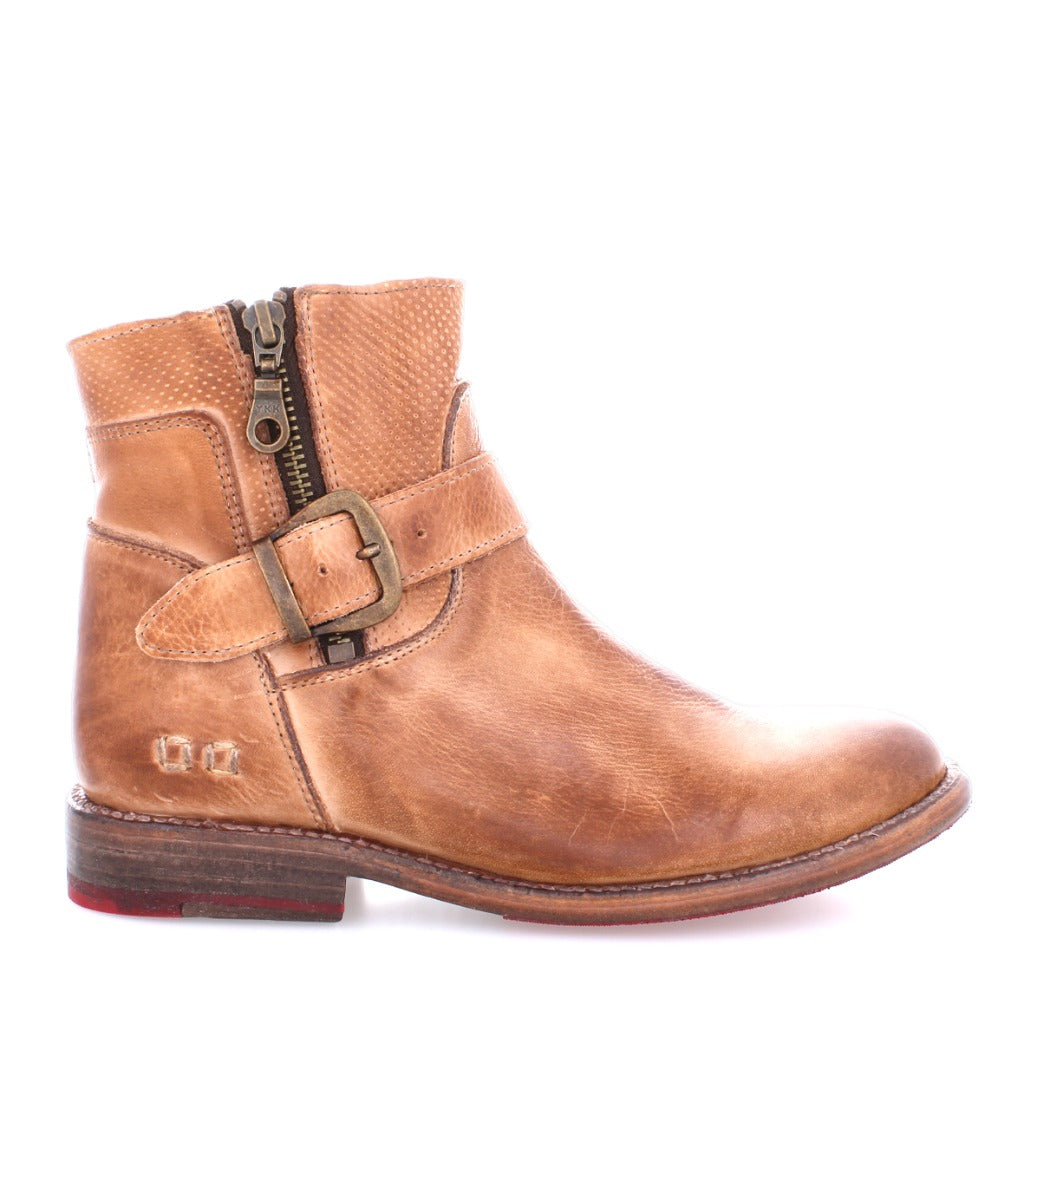 A women's Becca ankle boot with a buckle by Bed Stu.